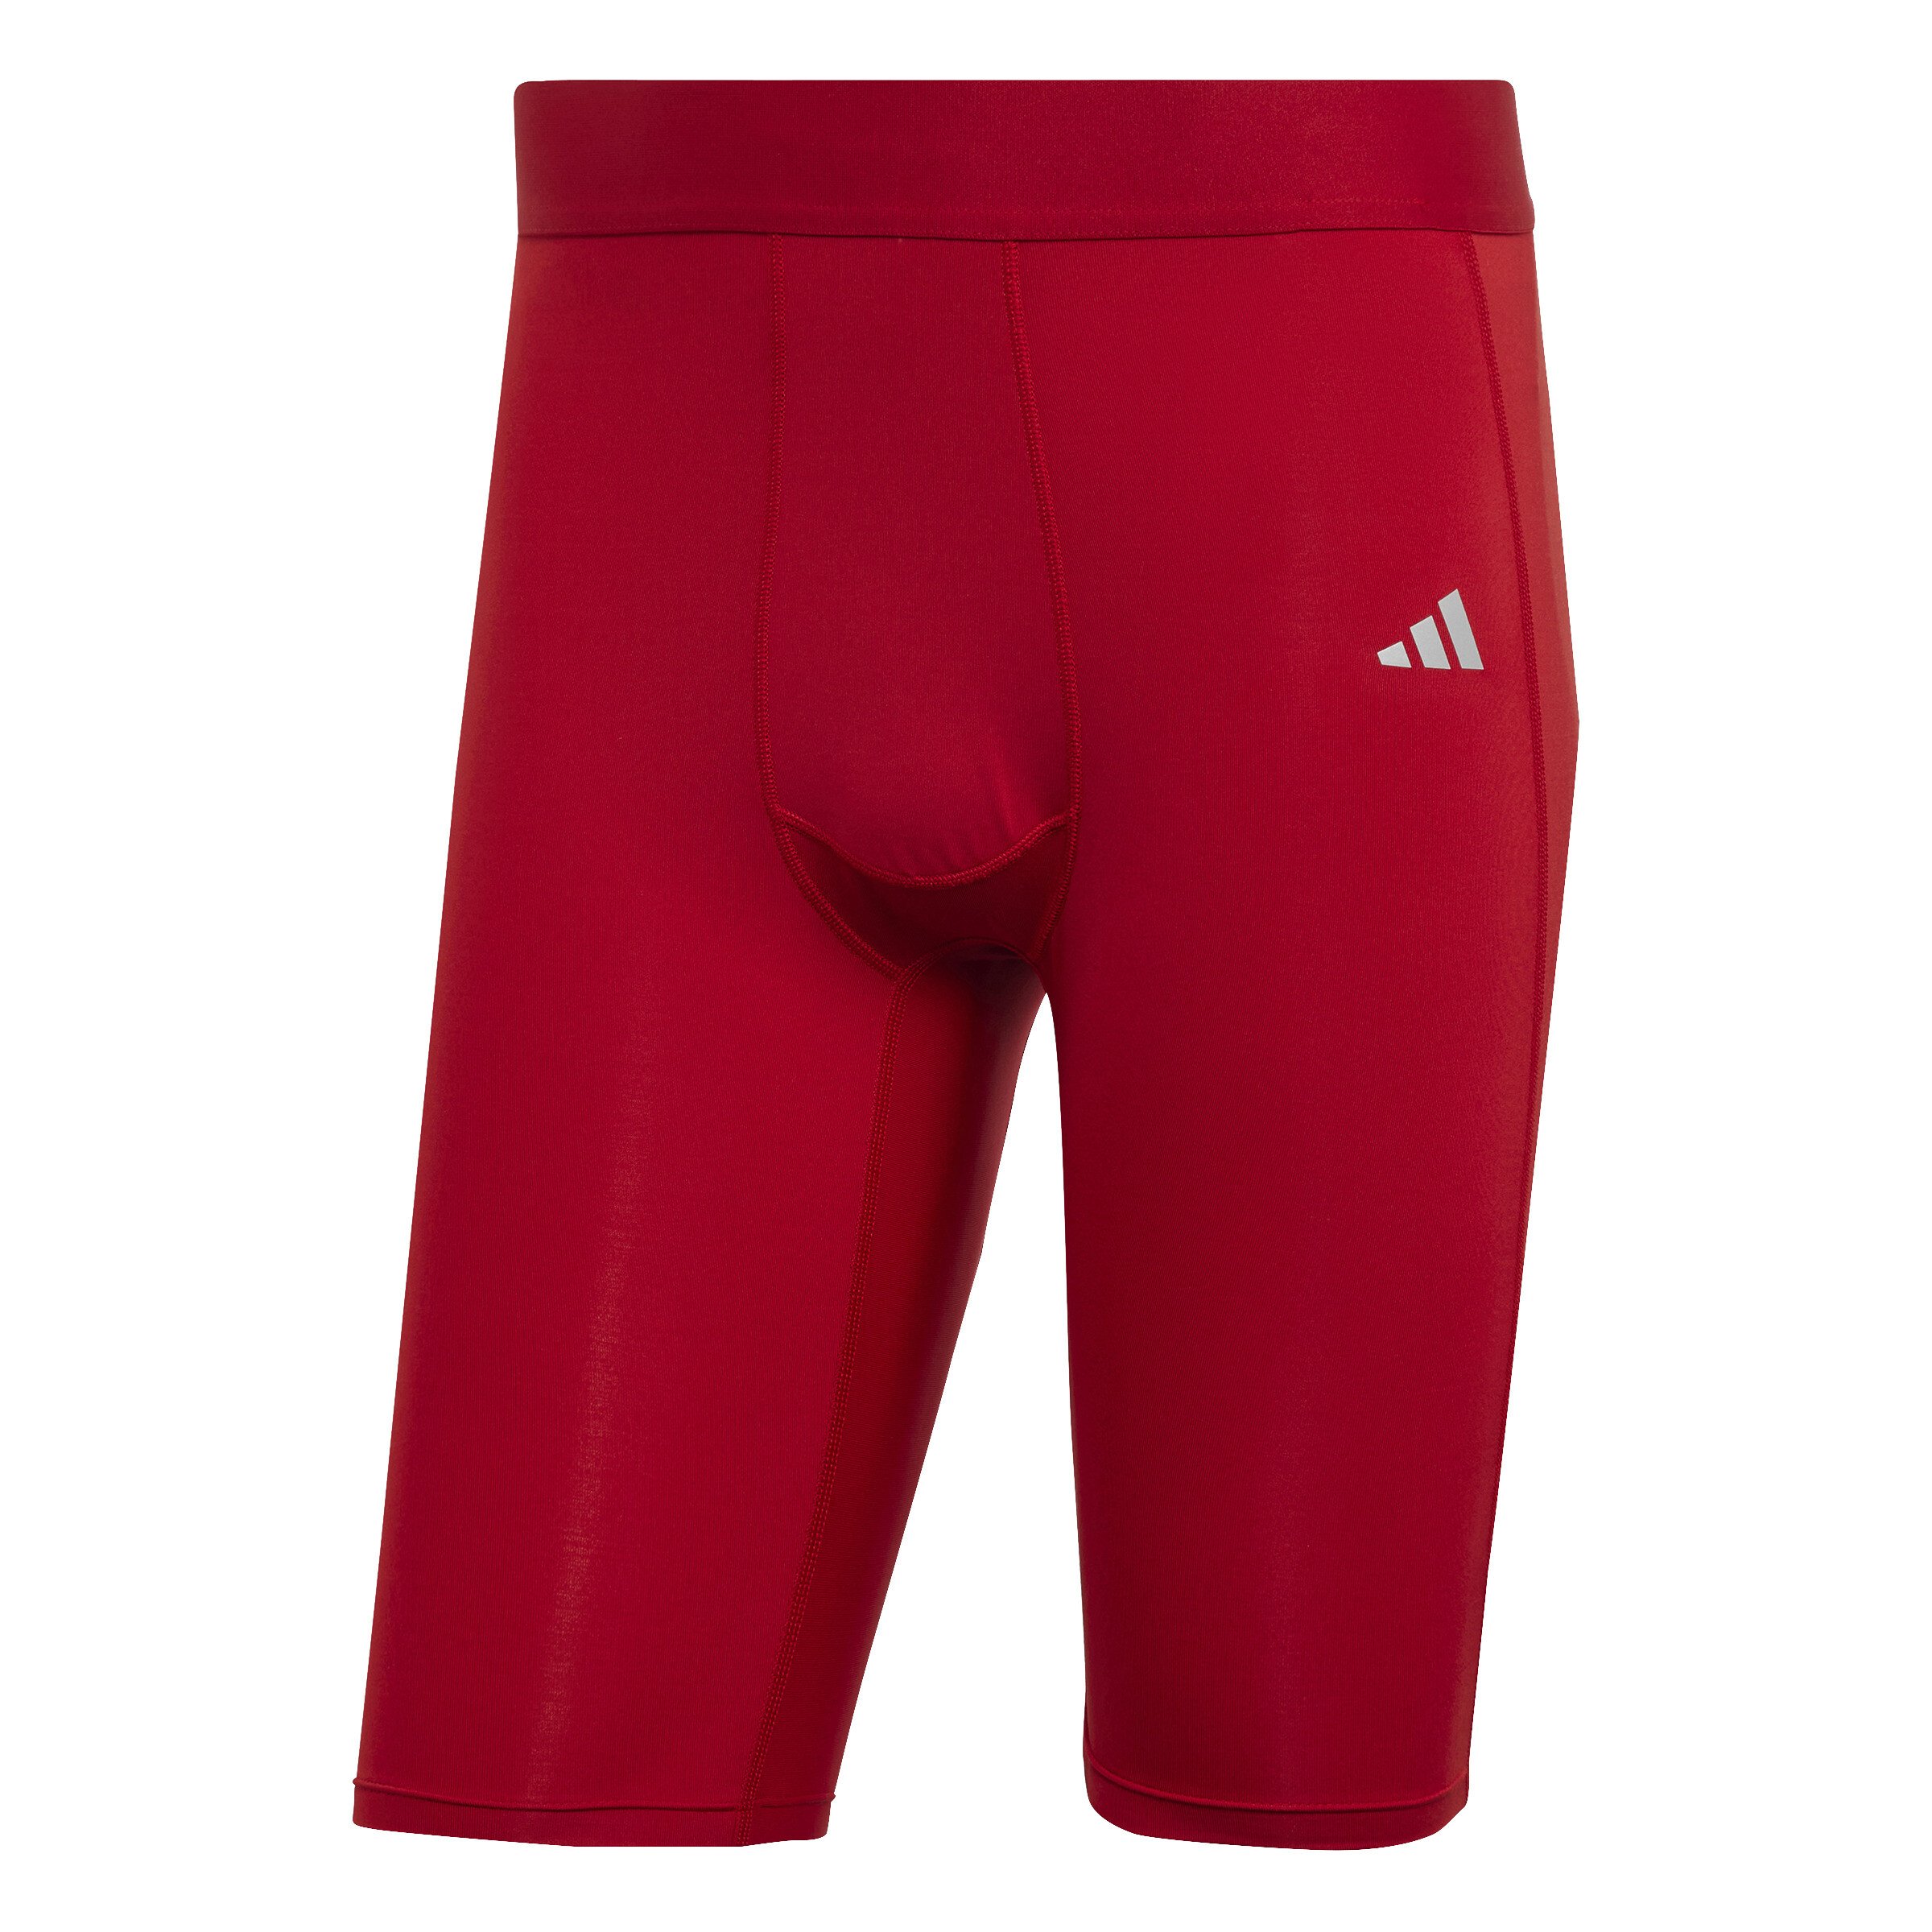 https://www.totalfootballdirect.com/Cache/Images/Adidas-Techfit-Short-Tights-Team-Power-Red-2.jpg